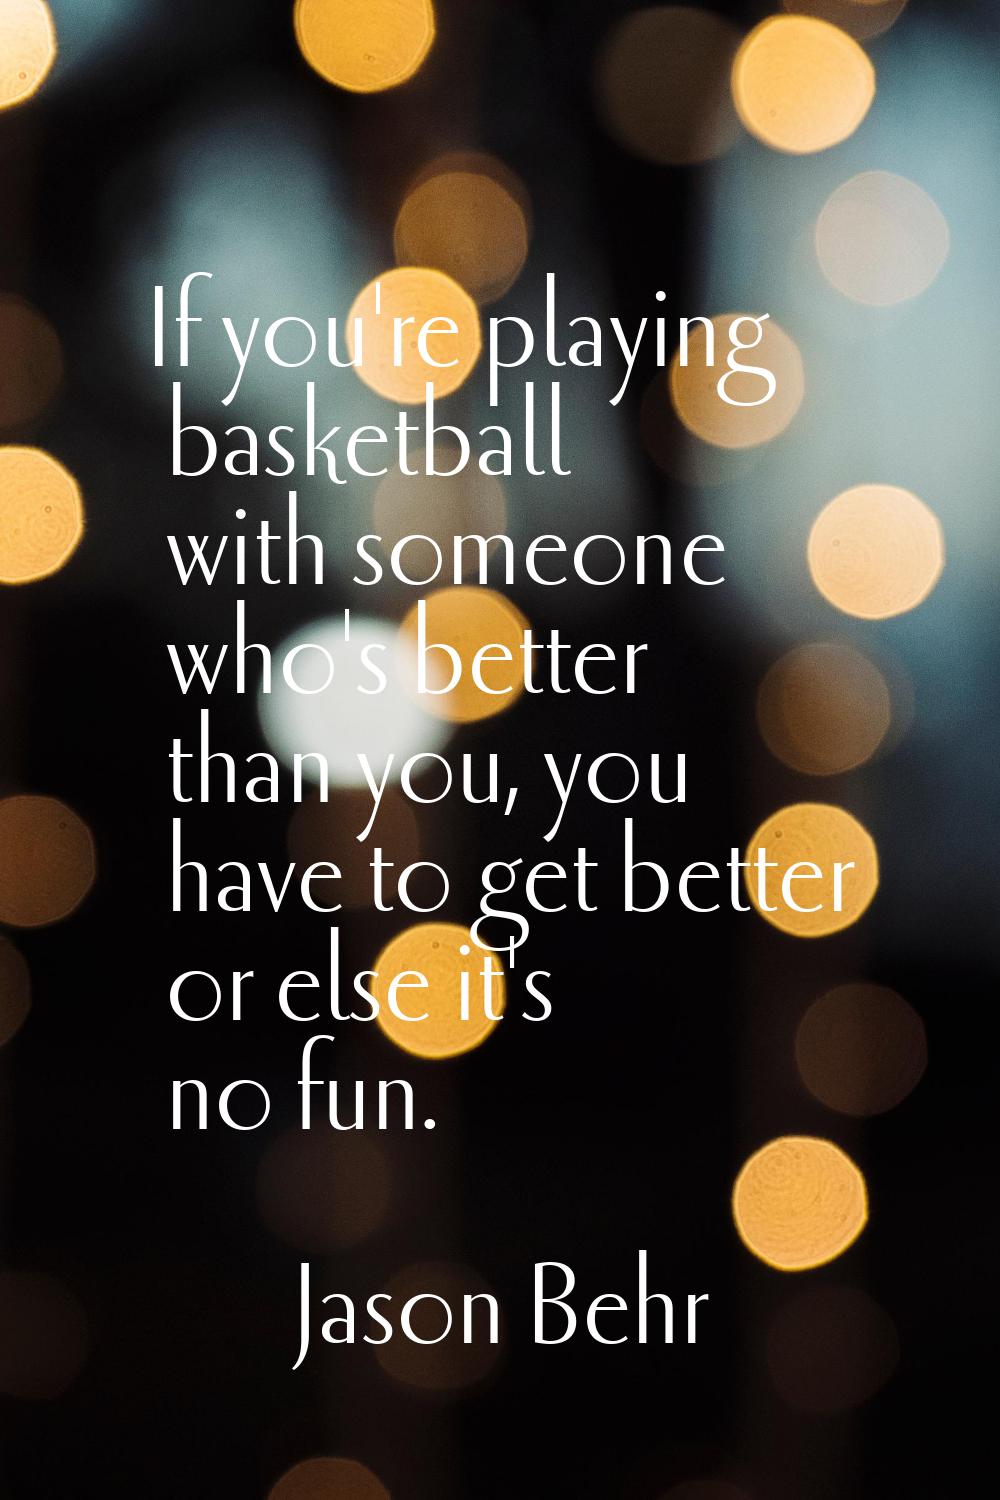 If you're playing basketball with someone who's better than you, you have to get better or else it'